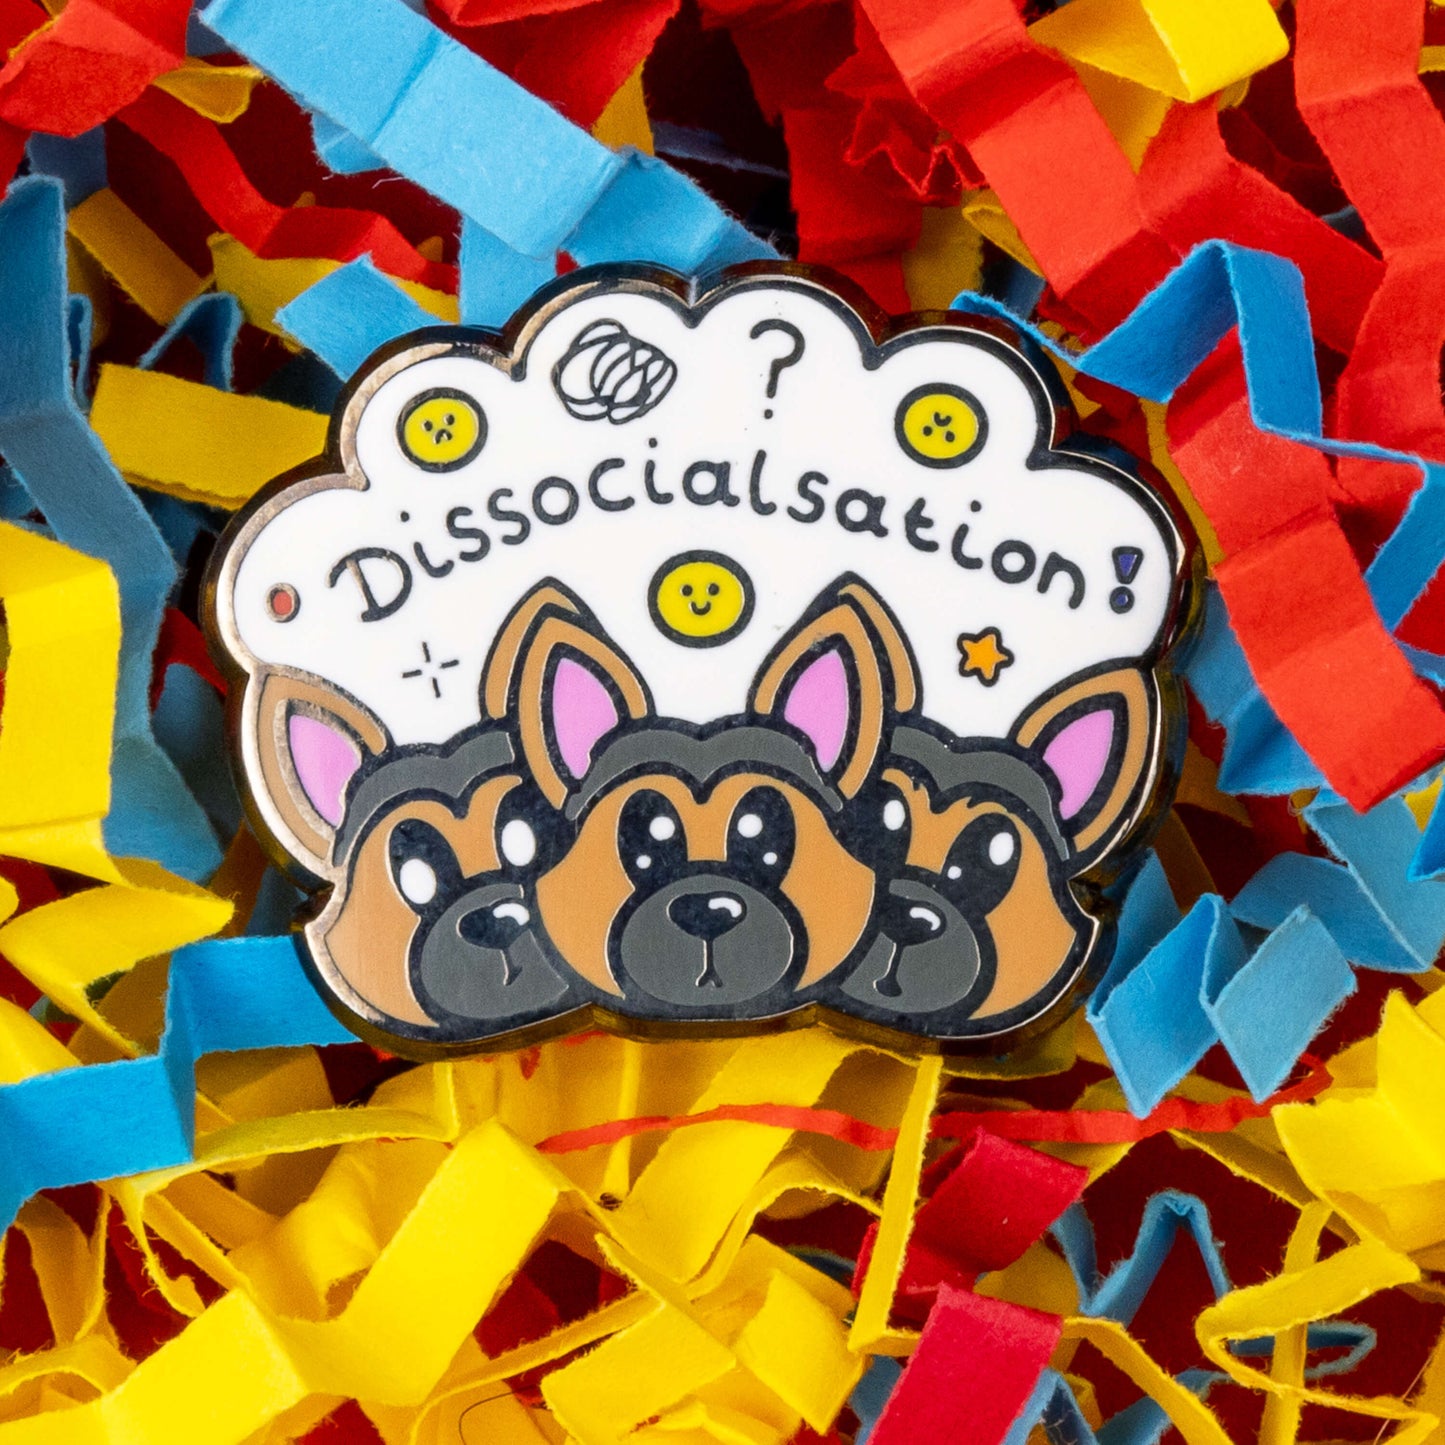 The Dissocialsation Enamel Pin - Dissociation on a red, blue and yellow card confetti background. Three confused brown and black Alsatian dog heads with their ears perked up, above them is a white cloud with sad and happy yellow faces, sparkles, question marks and black text reading 'dissocialsation!'. The design is raising awareness for dissociation.